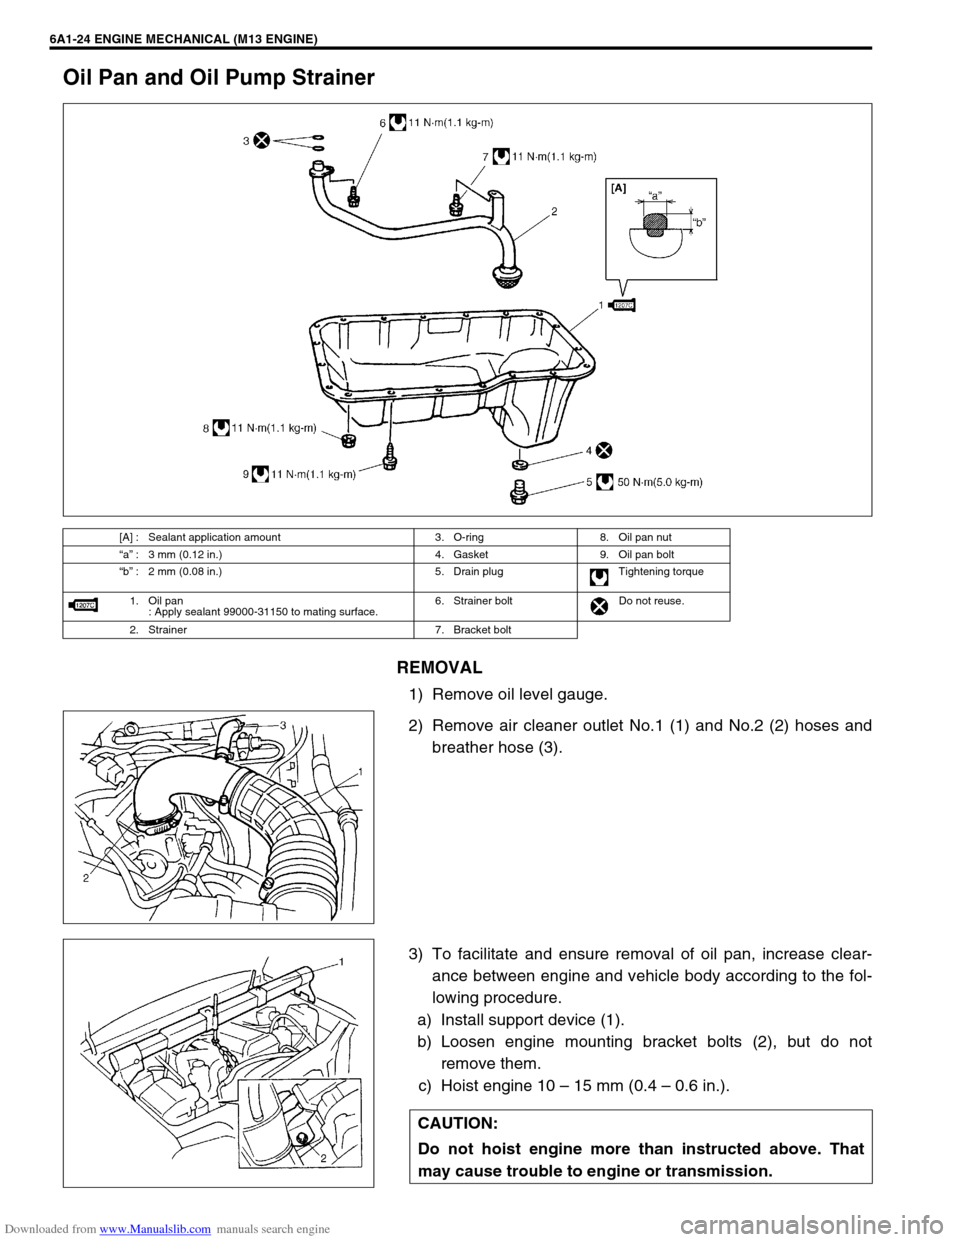 SUZUKI JIMNY 2005 3.G Service Workshop Manual Downloaded from www.Manualslib.com manuals search engine 6A1-24 ENGINE MECHANICAL (M13 ENGINE)
Oil Pan and Oil Pump Strainer
REMOVAL
1) Remove oil level gauge.
2) Remove air cleaner outlet No.1 (1) an